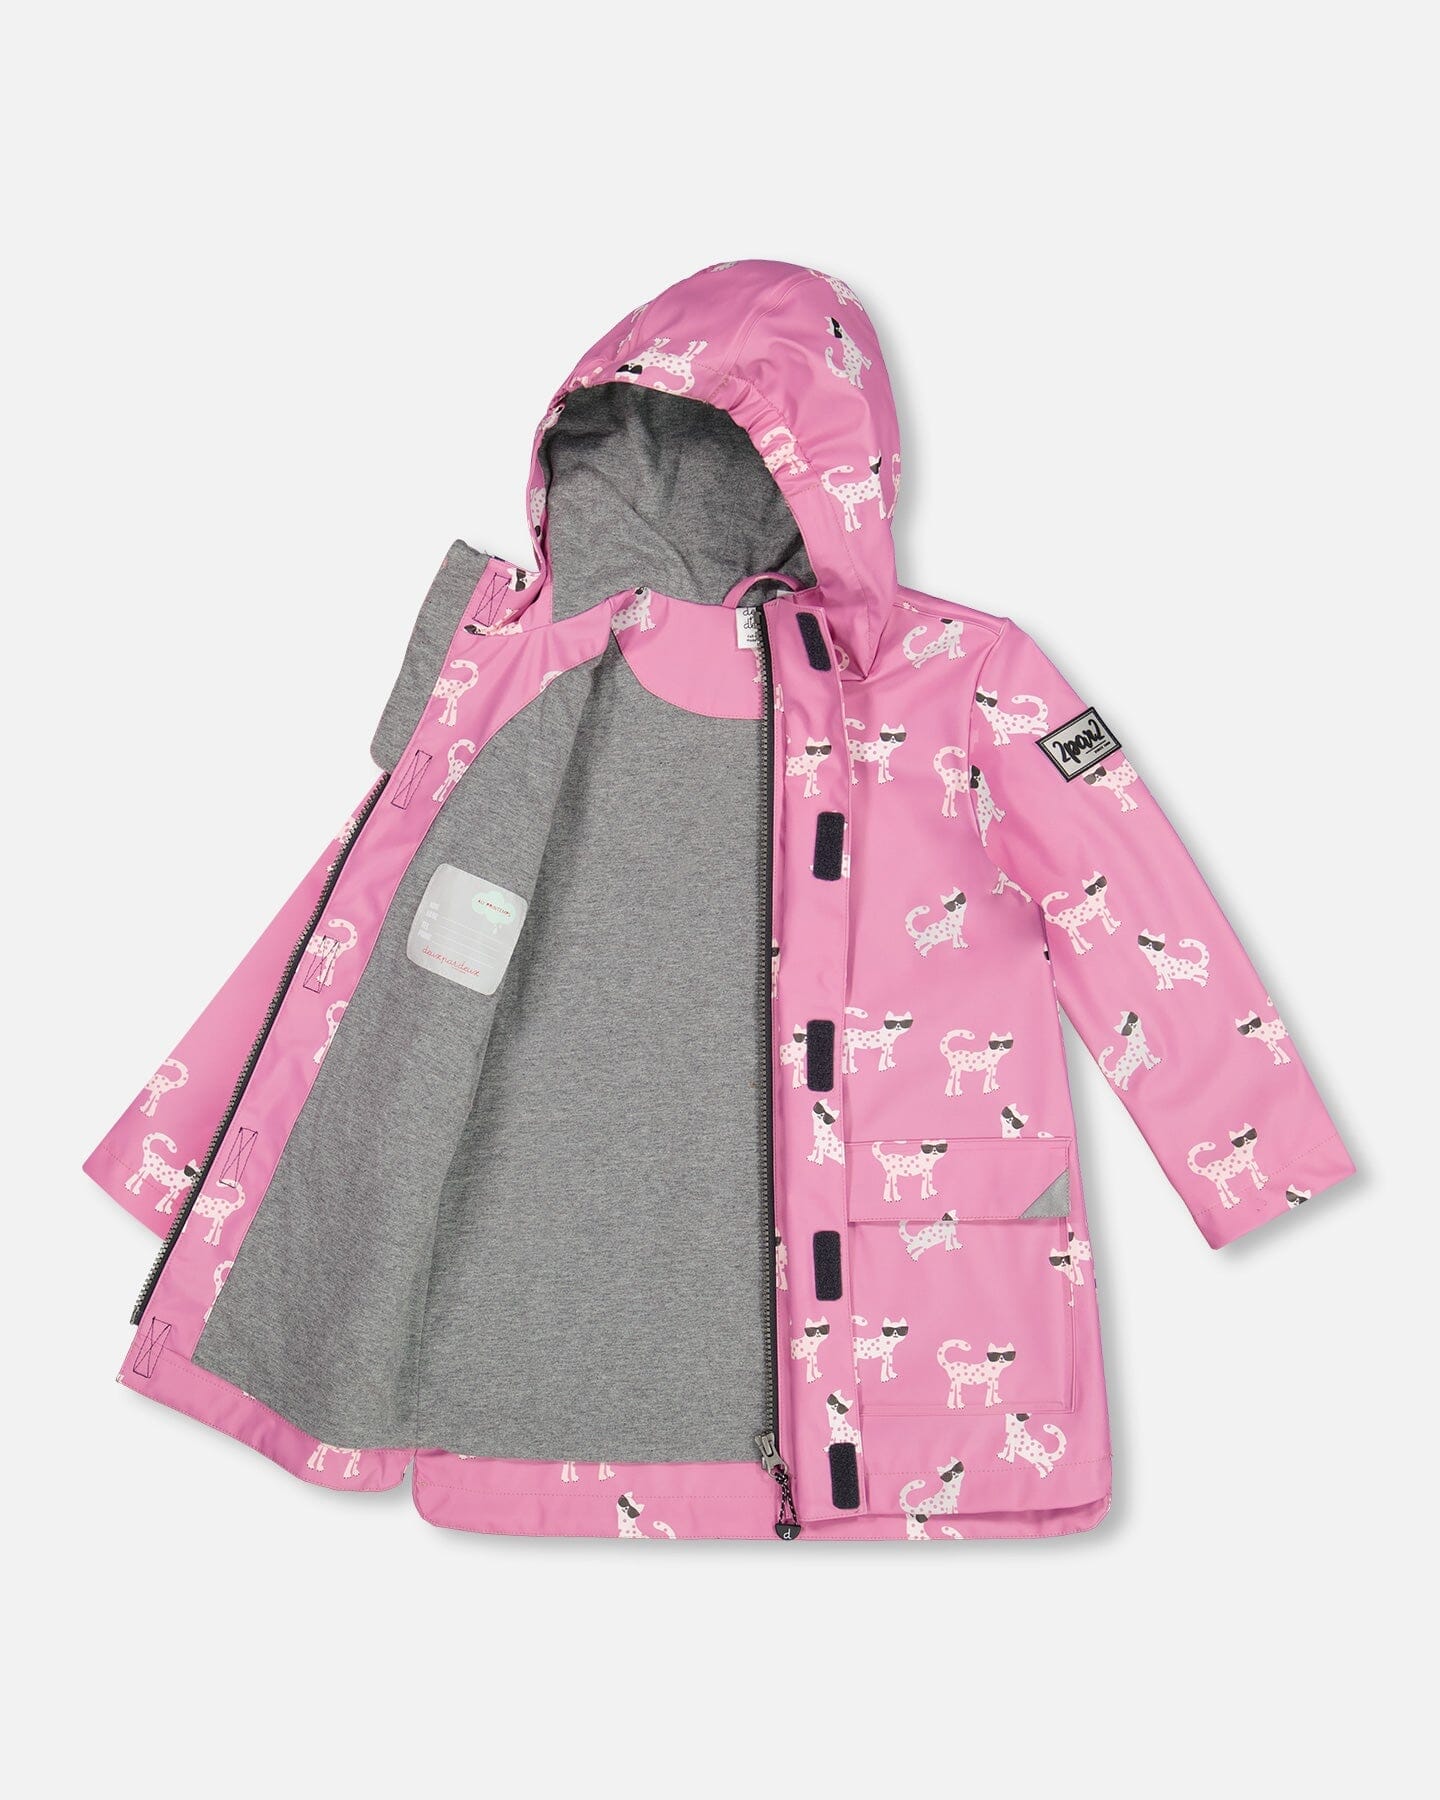 Changing Color Rain Coat And Hat Set Pink Printed Sunglasses Cats - F30W98_010